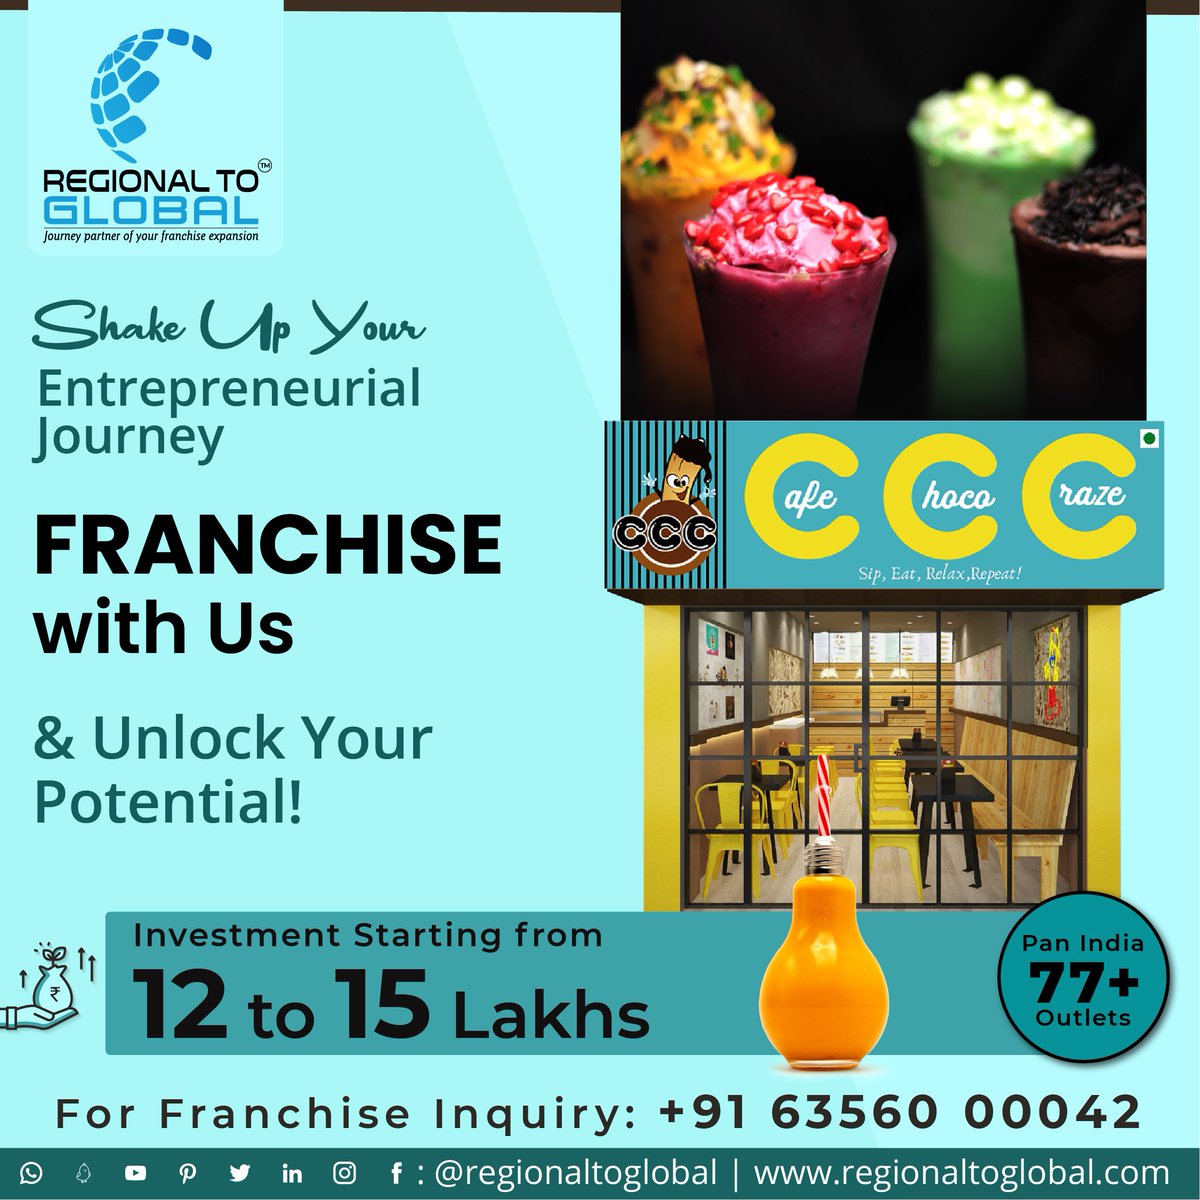 Shake Up Your Entrepreneurial Journey
FRANCHISE with Us & Unlock Your Potential!

#franchiseopportunities #cafechococraze #cafechococrazefranchise #FranchiseOwnership #shakeupyourbusiness #franchisesystems #ProvenModel #winthemarket #EntrepreneurialJourney #UnlockYourPotential